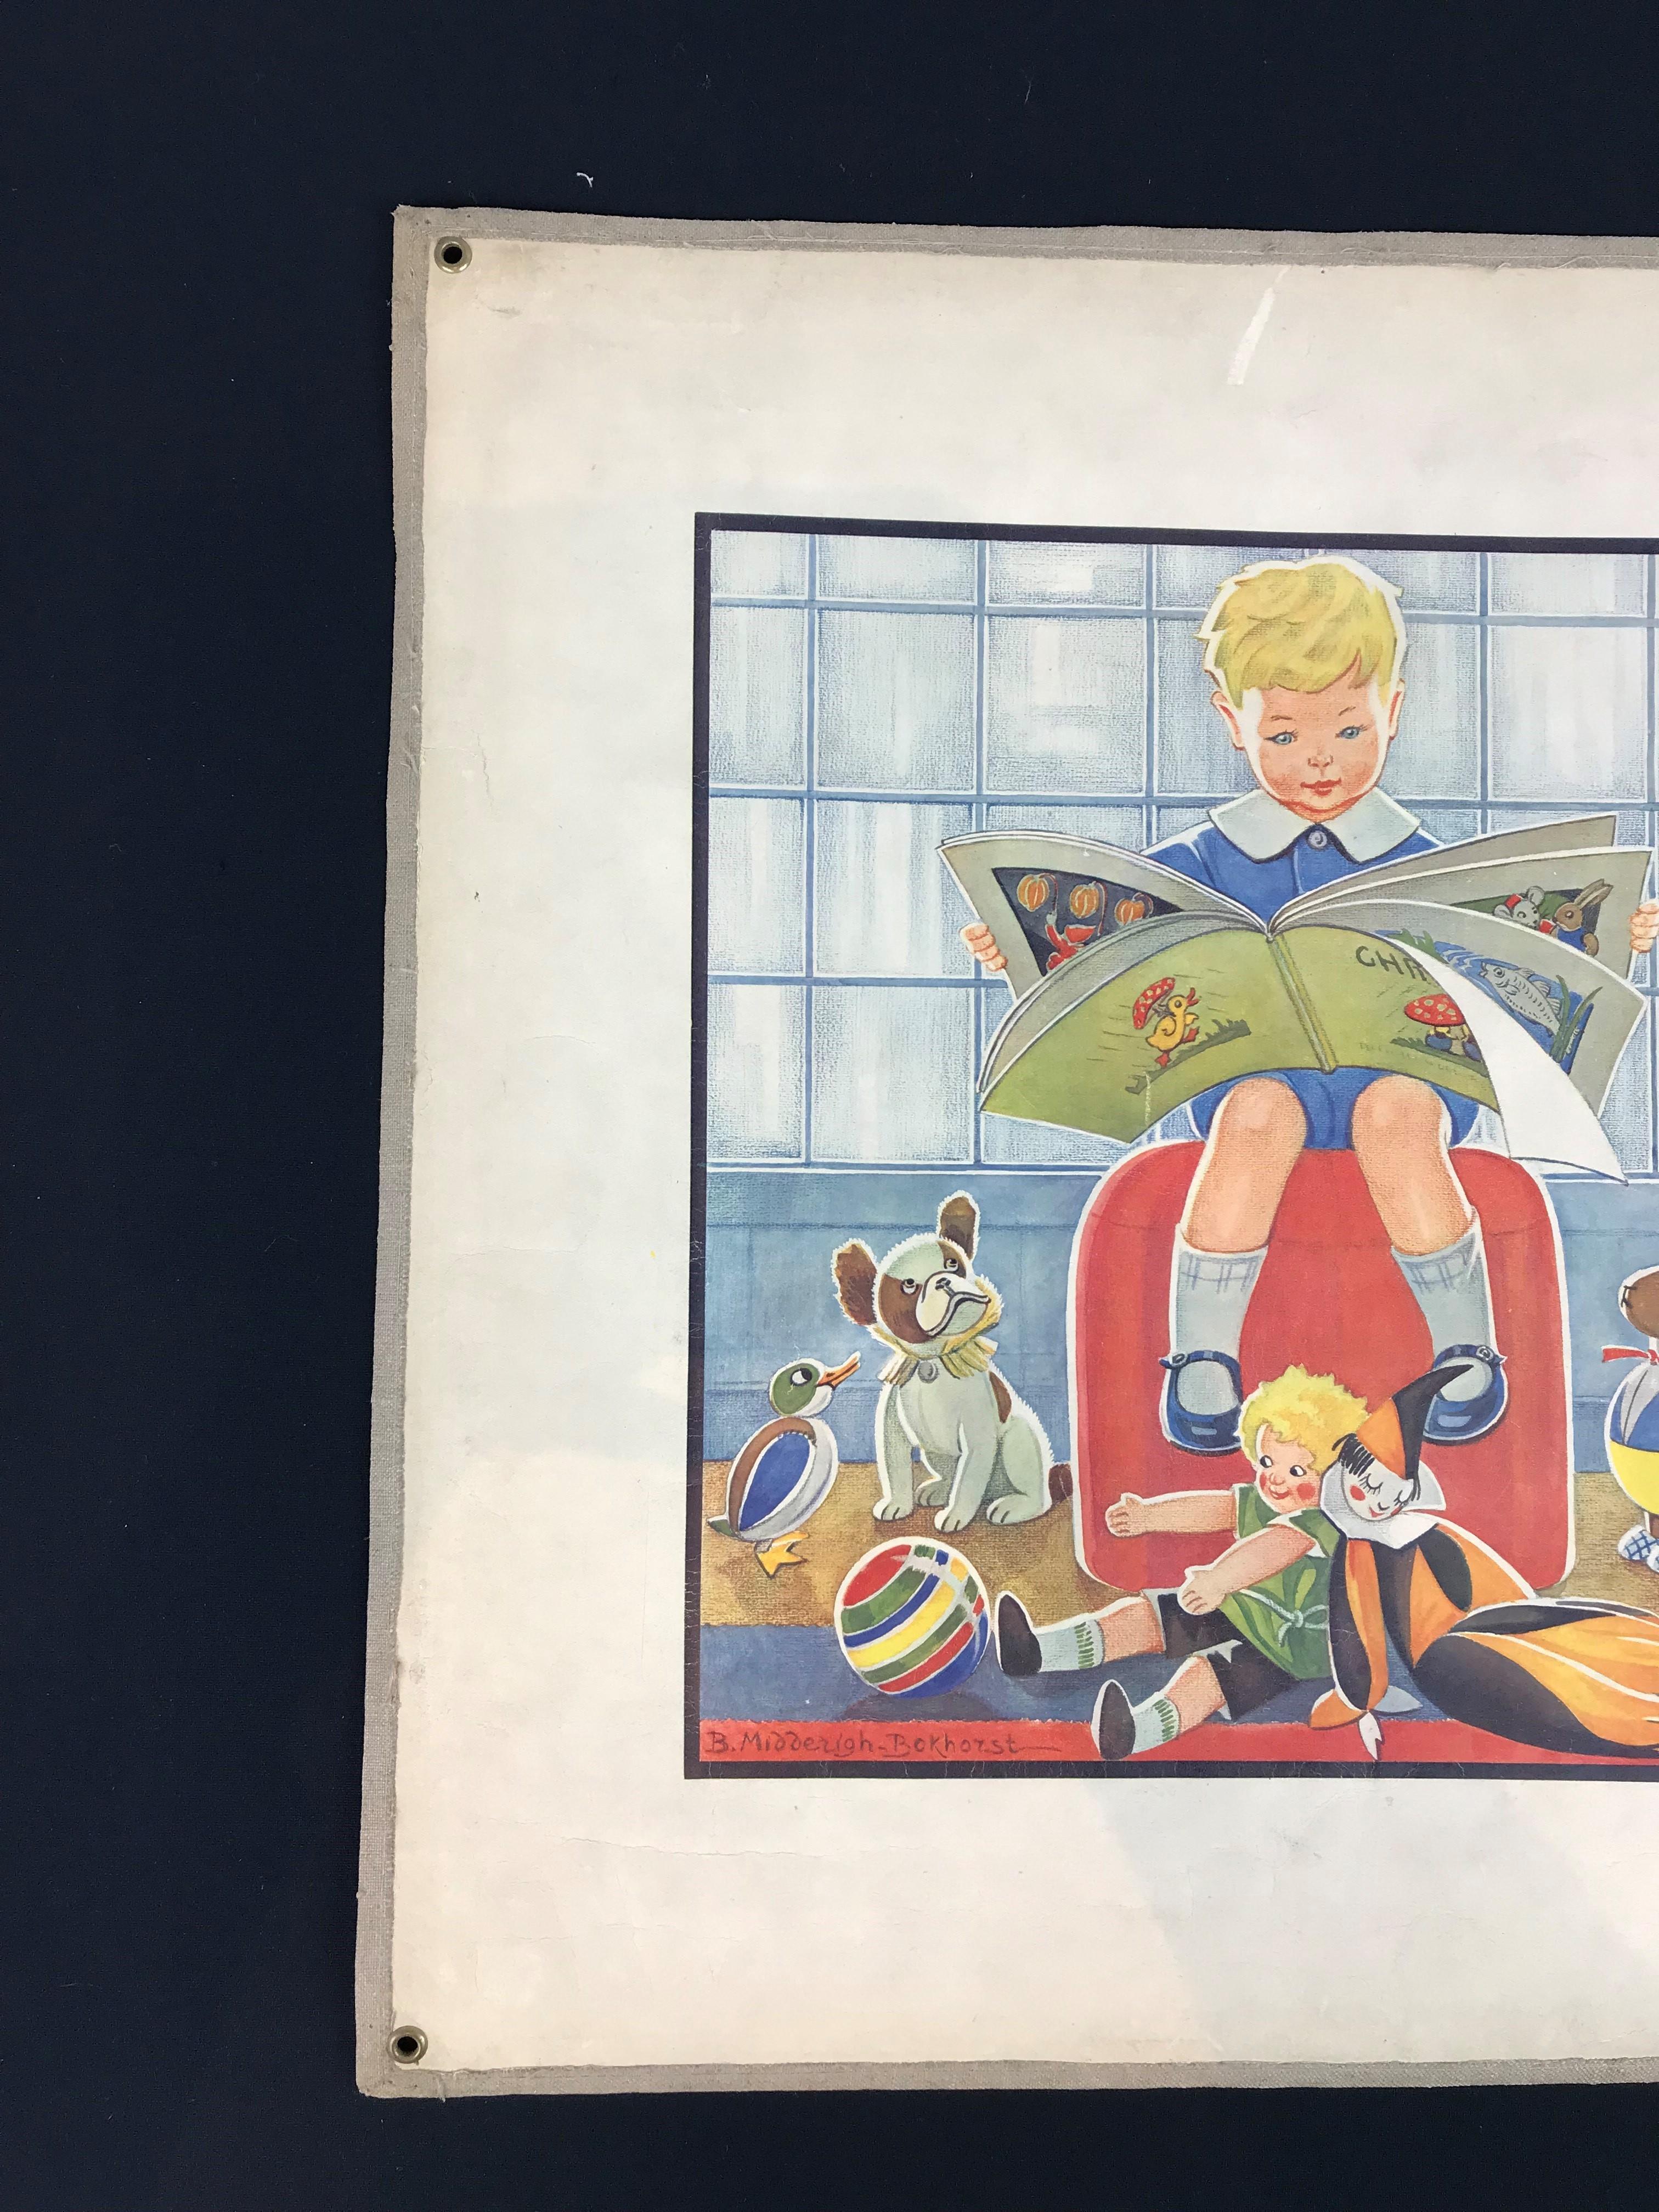 1930s Educational school chart with a boy reading a picture book. 
He's surrounded by all his beautiful antique toys: 
a great stuffed French Bulldog toy, harlequin dolls, penguin, ball etc ....
This vintage school poster is still originally